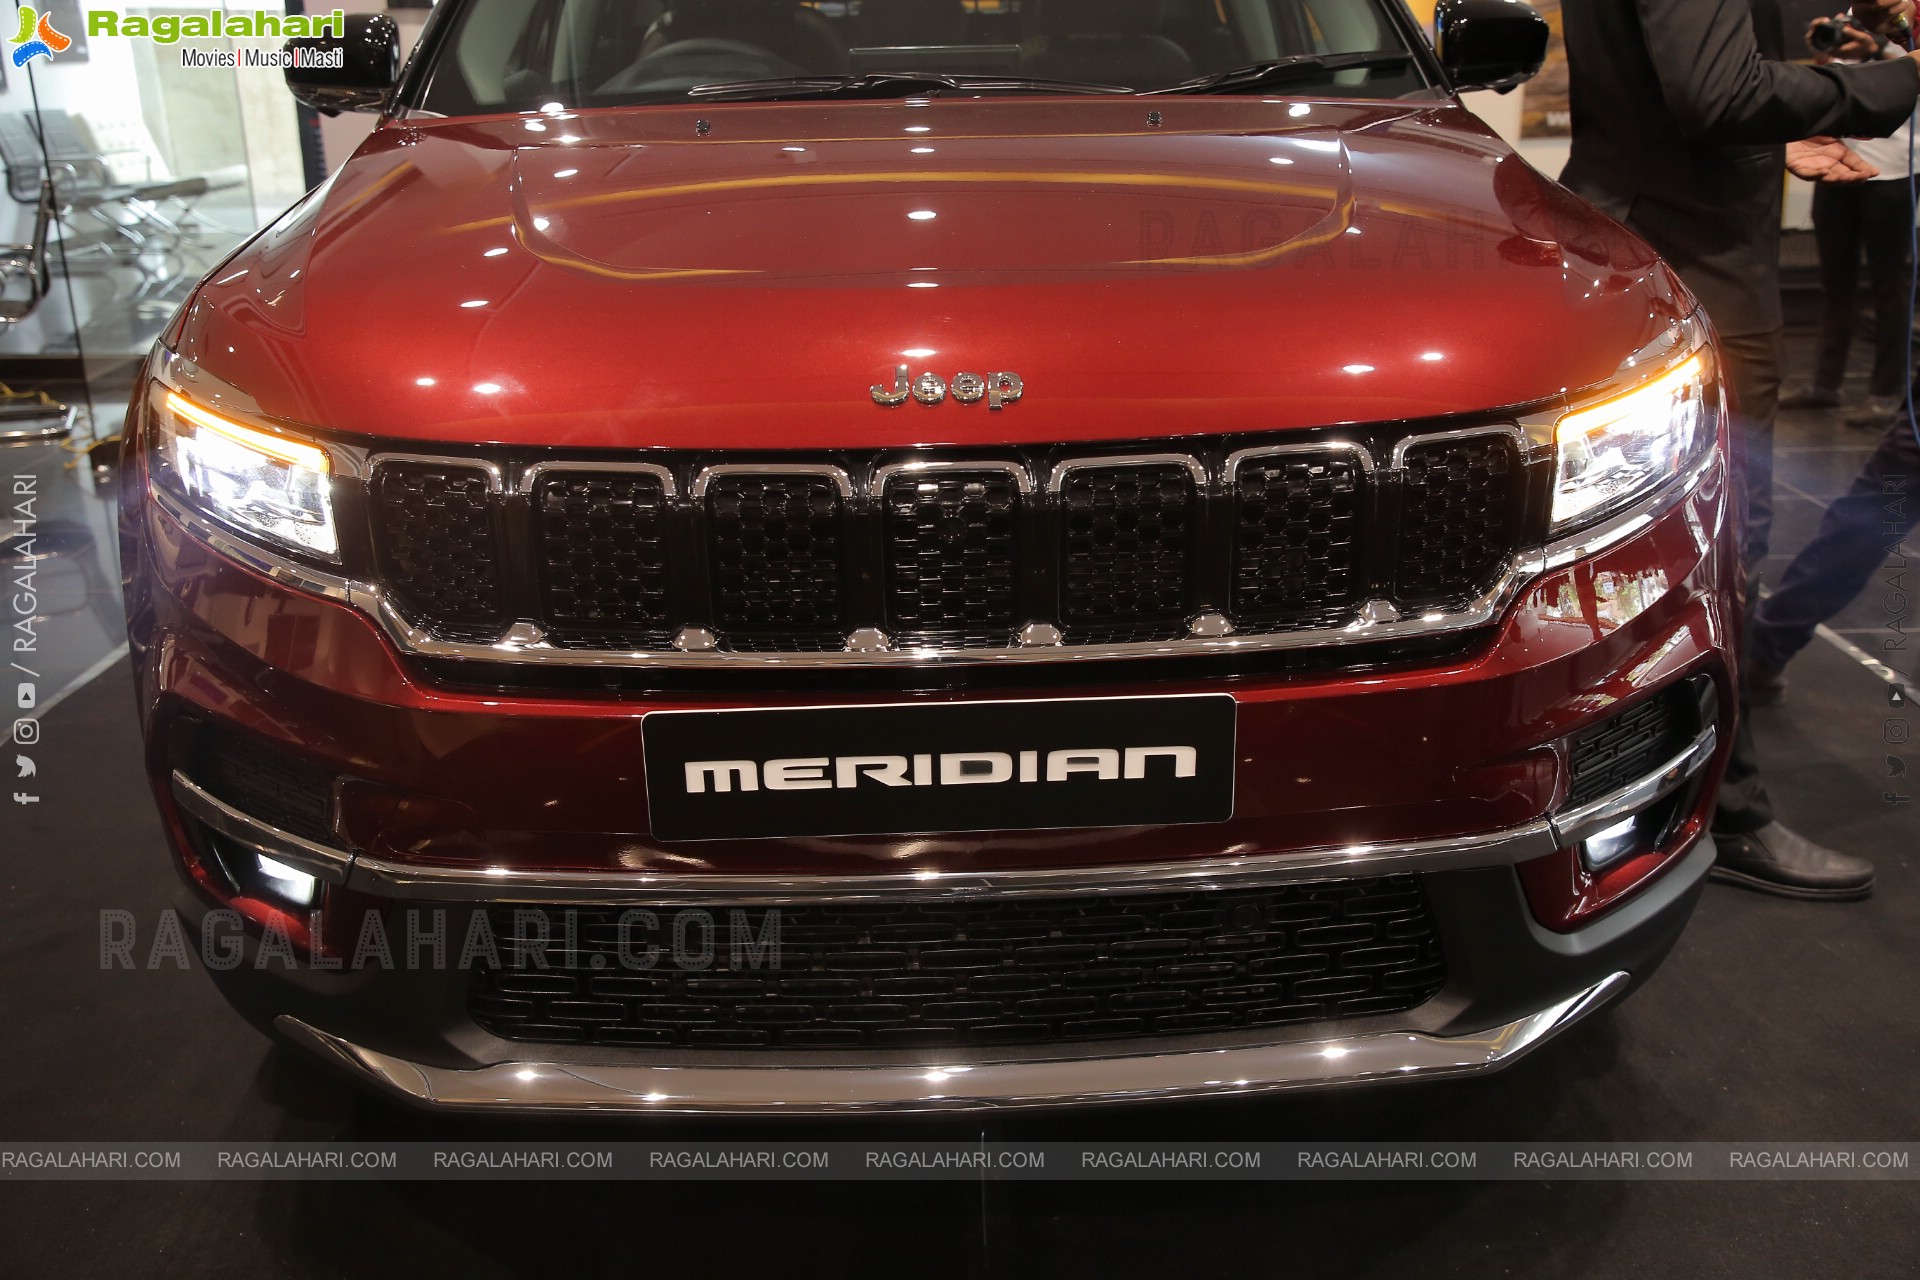 New Jeep Meridian 7-seat SUV India Launch